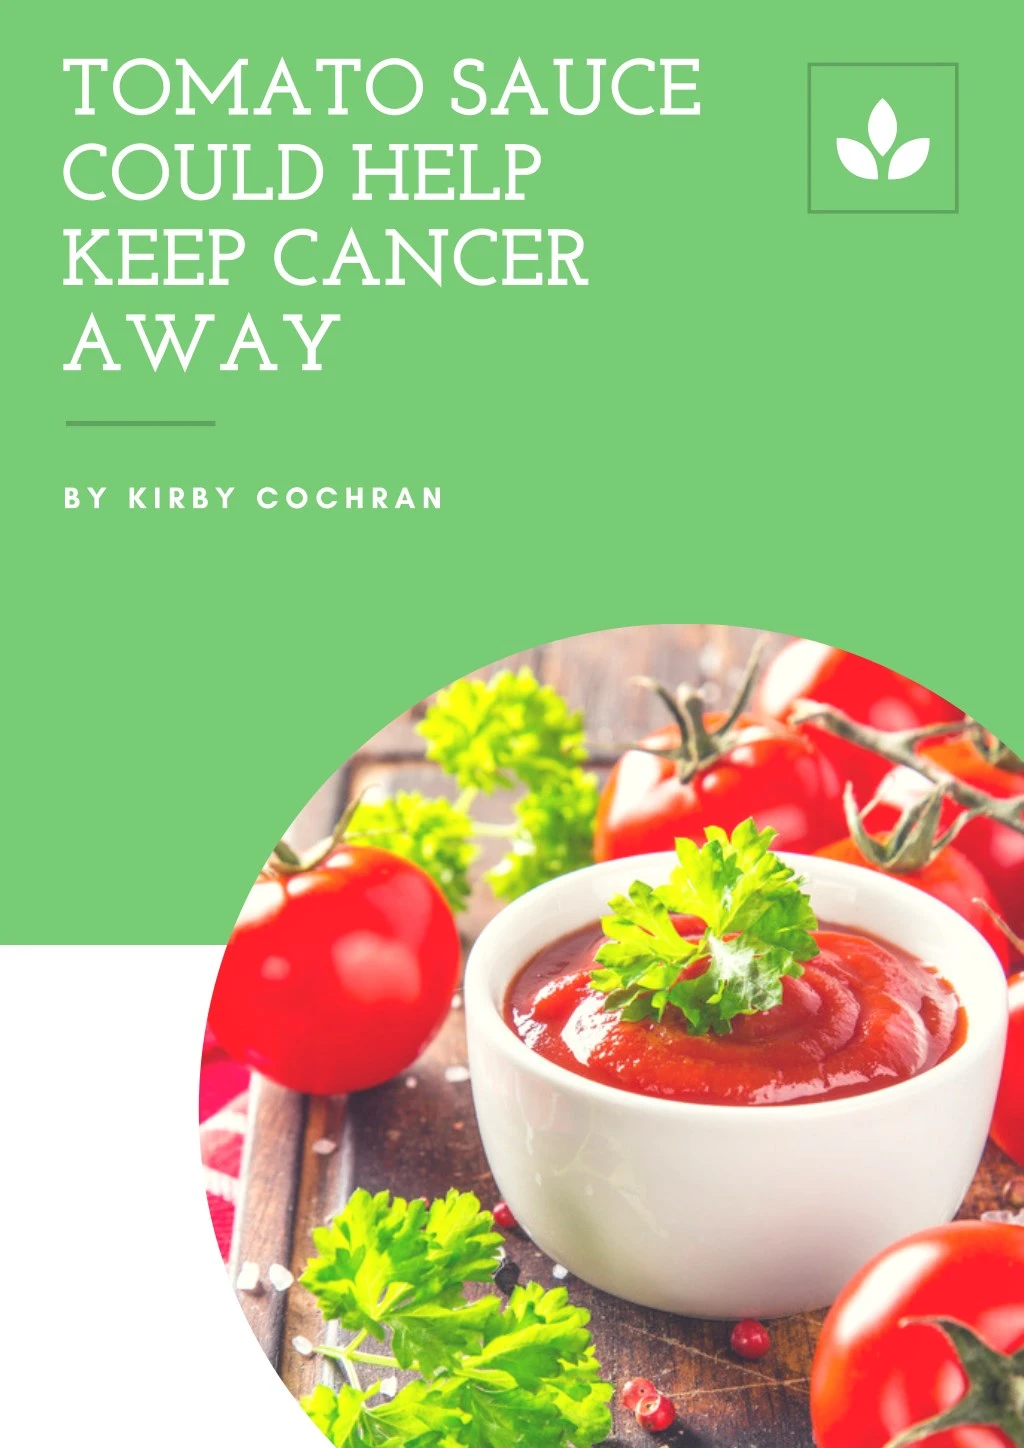 tomato sauce could help keep cancer away